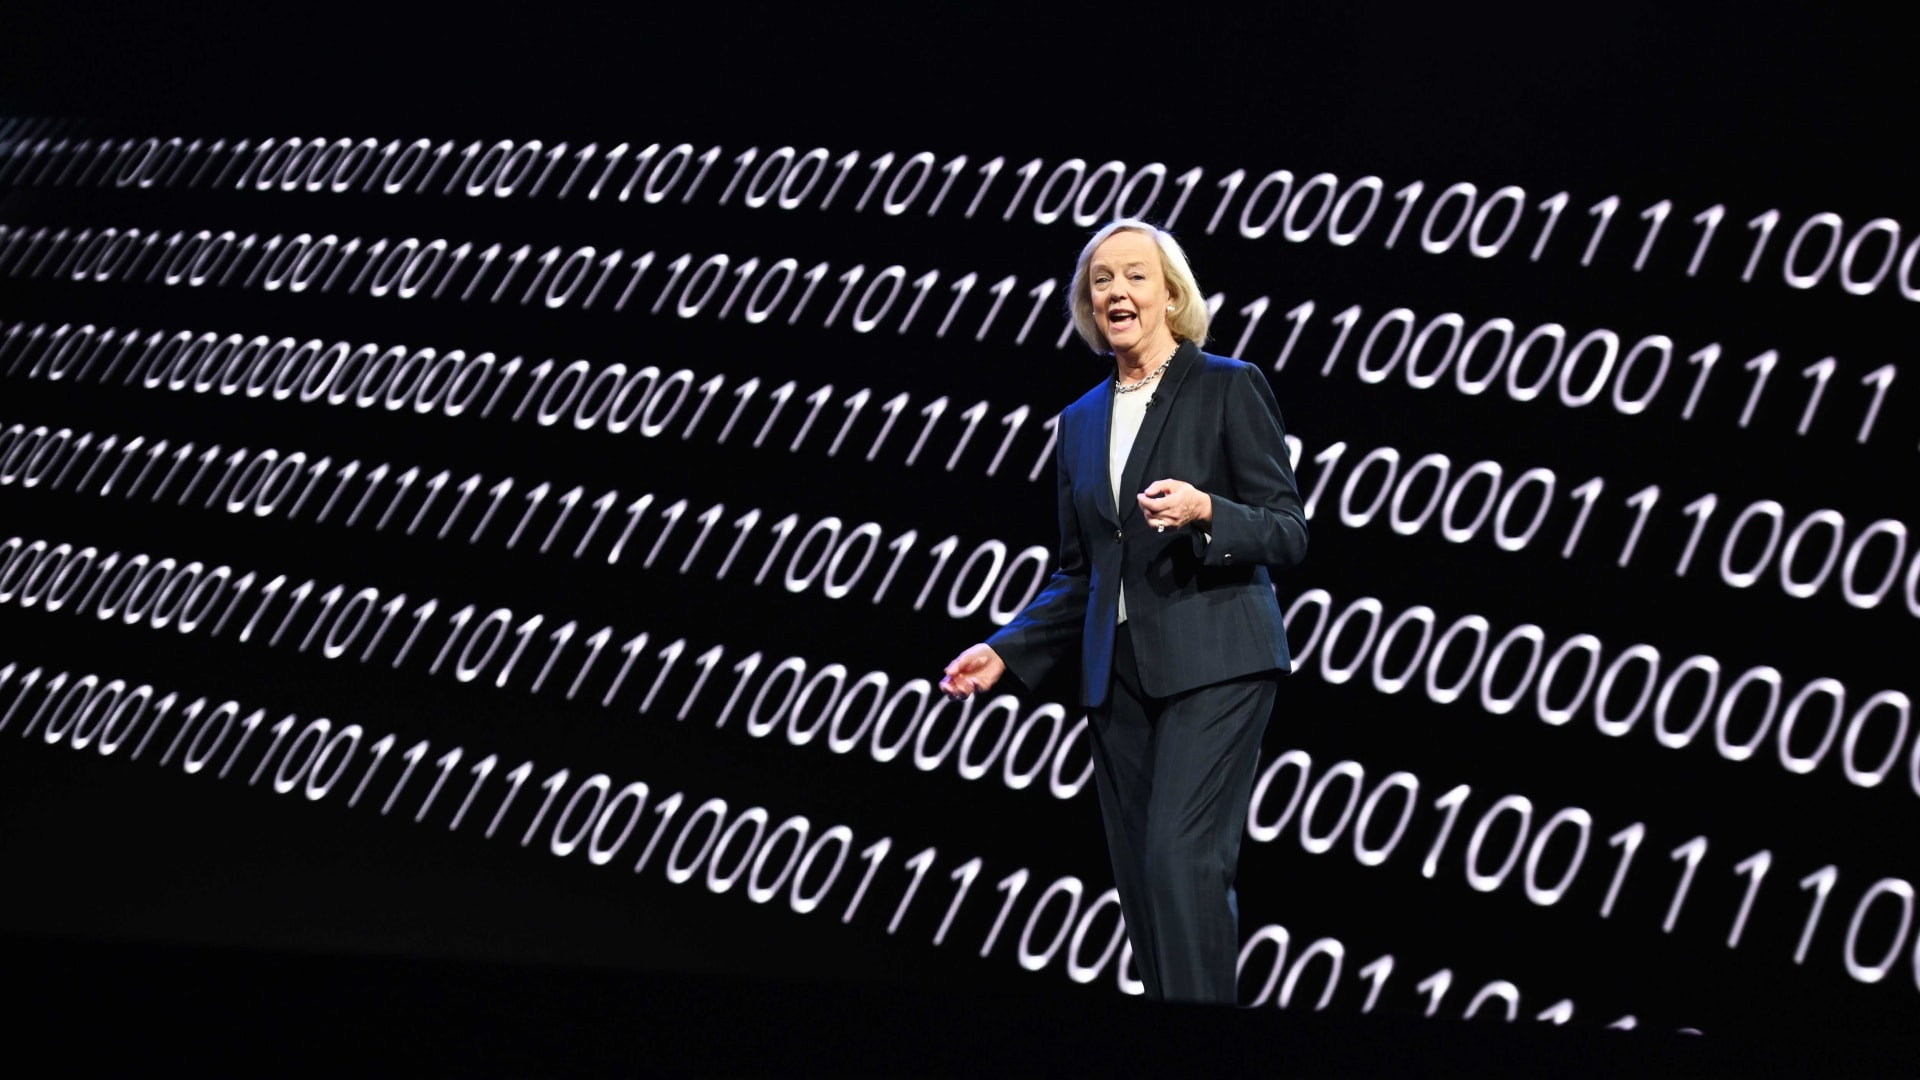 Quibi CEO Meg Whitman speaks about the short-form video streaming service during a keynote address January 8, 2020 at the 2020 Consumer Electronics Show (CES) in Las Vegas. 